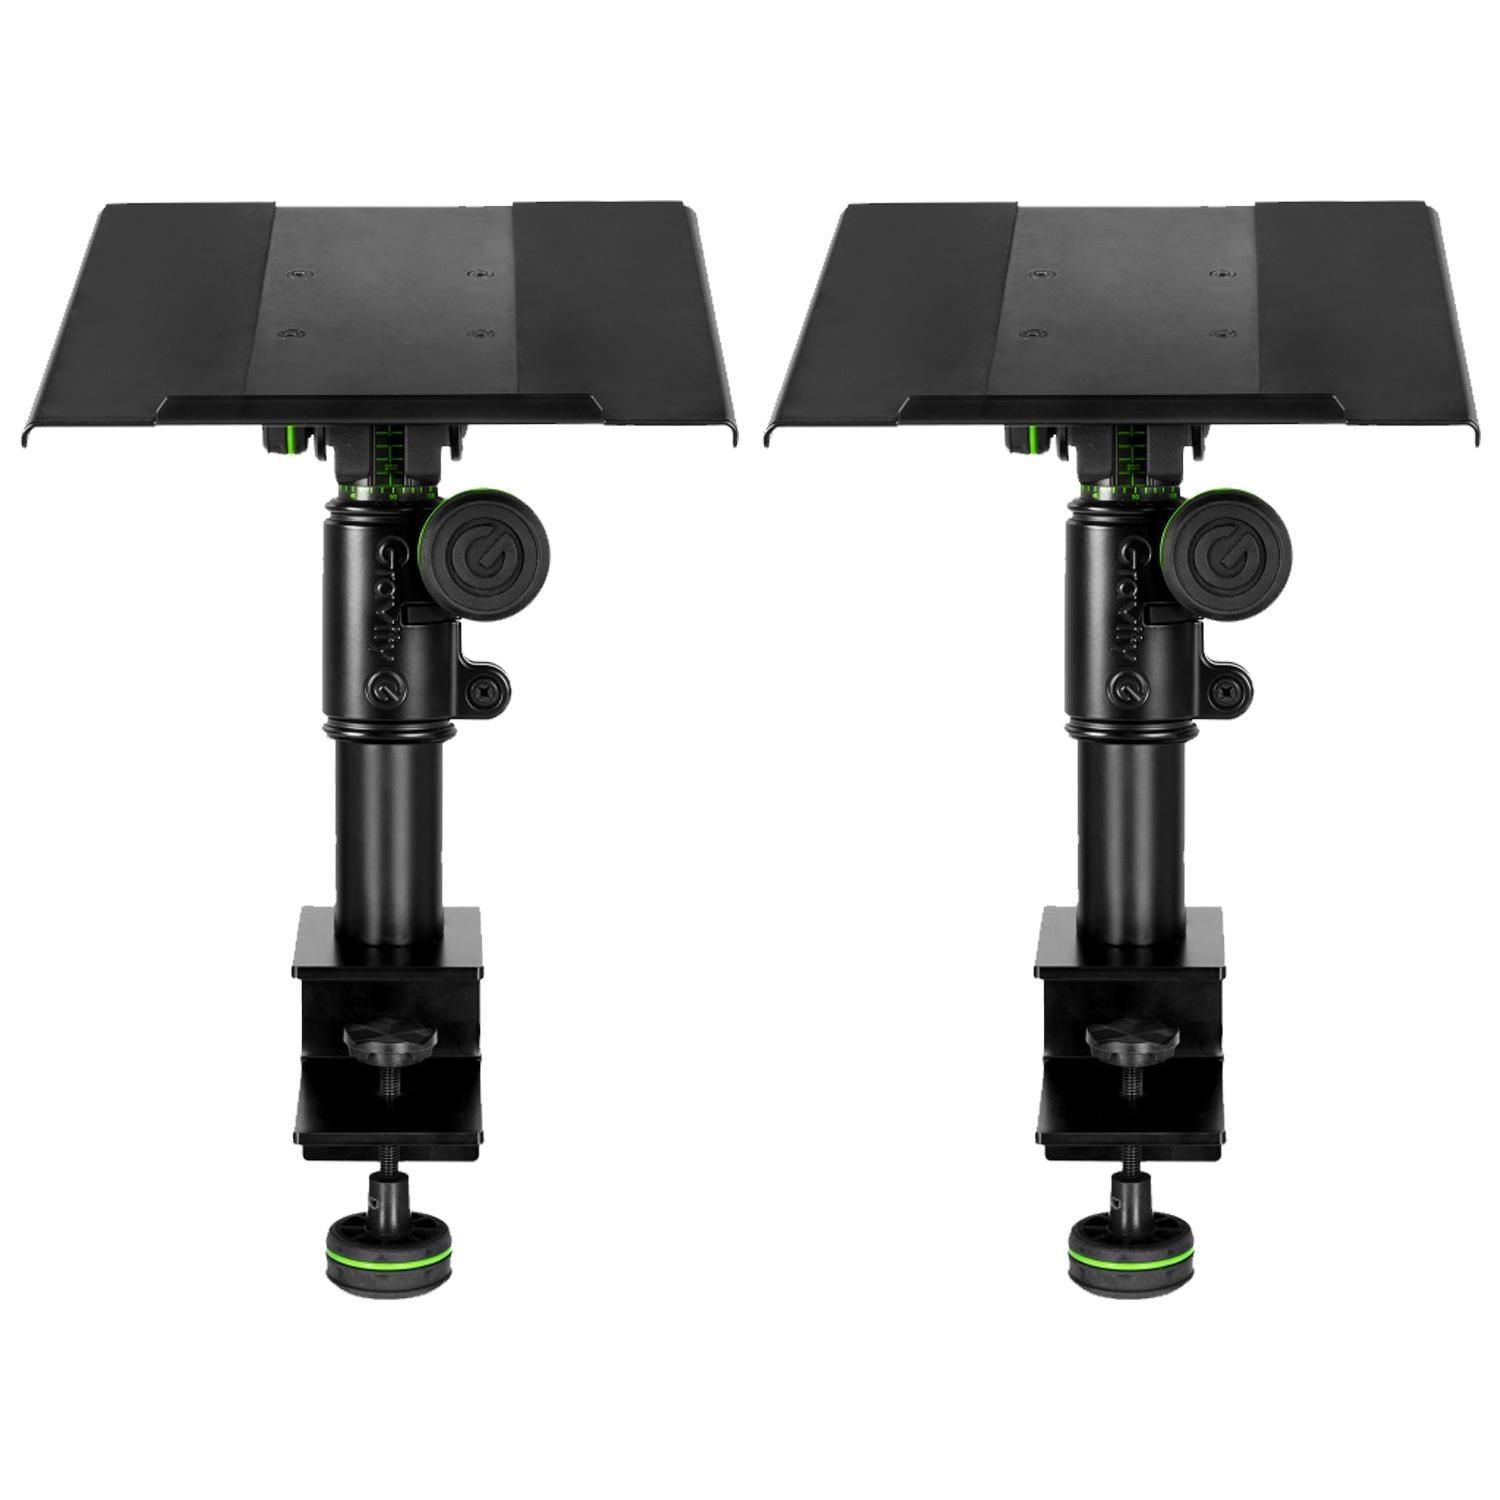 2 X Gravity SP 3102 TM Flexible studio monitor stand with table clamp - DY Pro Audio